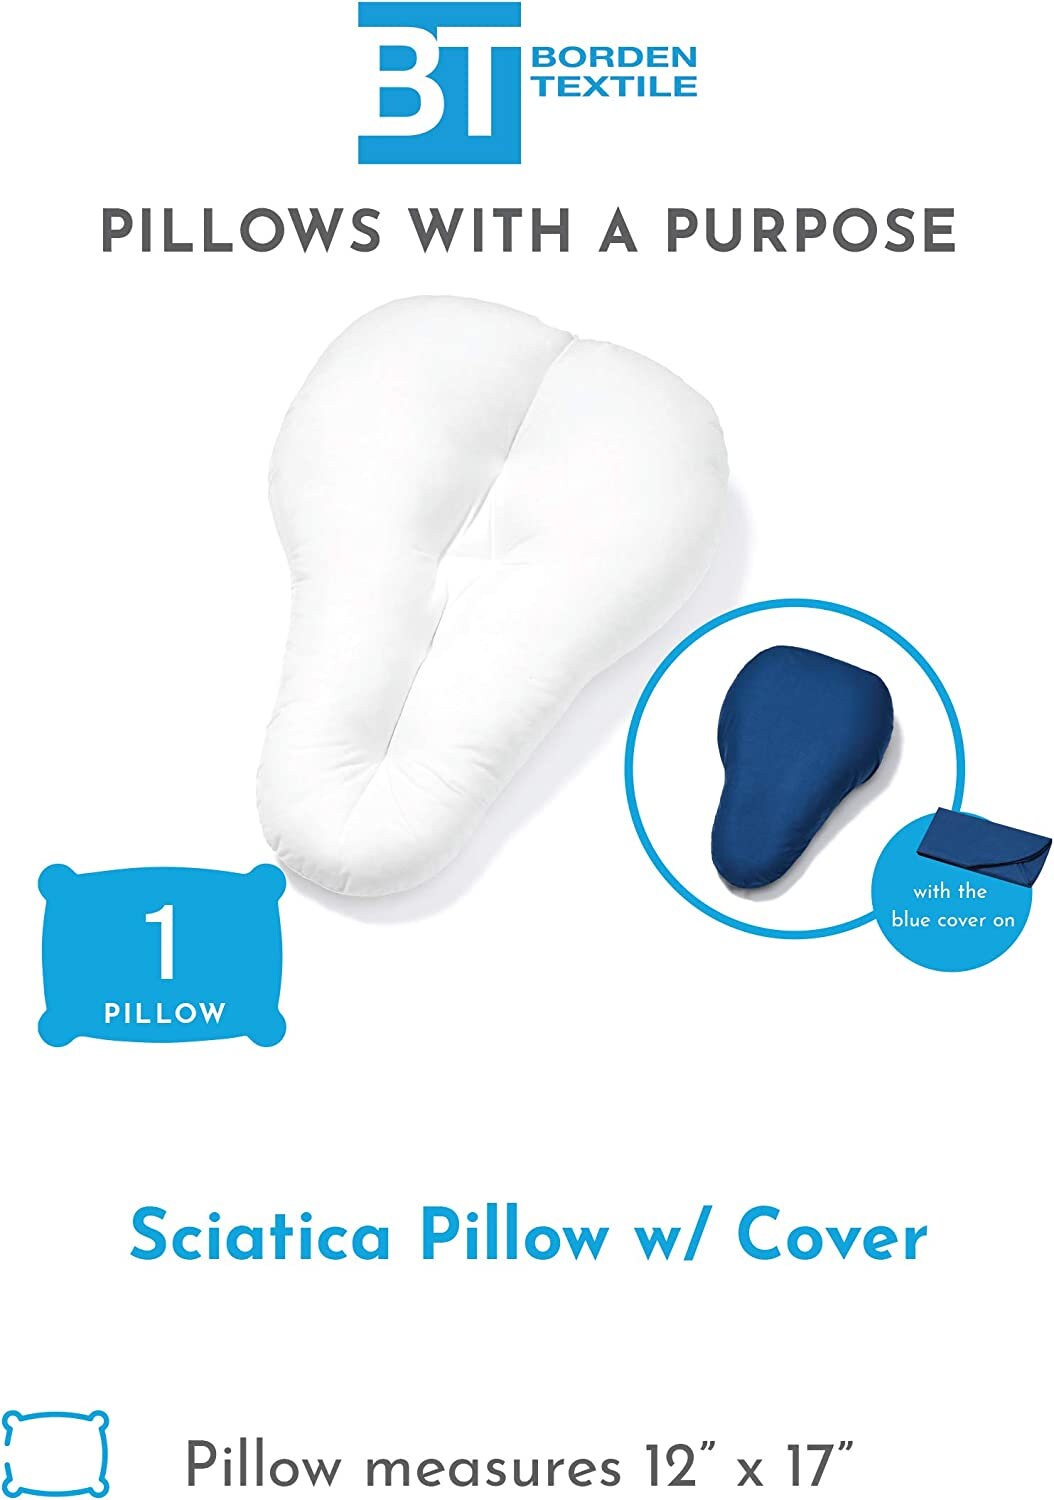 Sciatica Pillow And Its Benefits